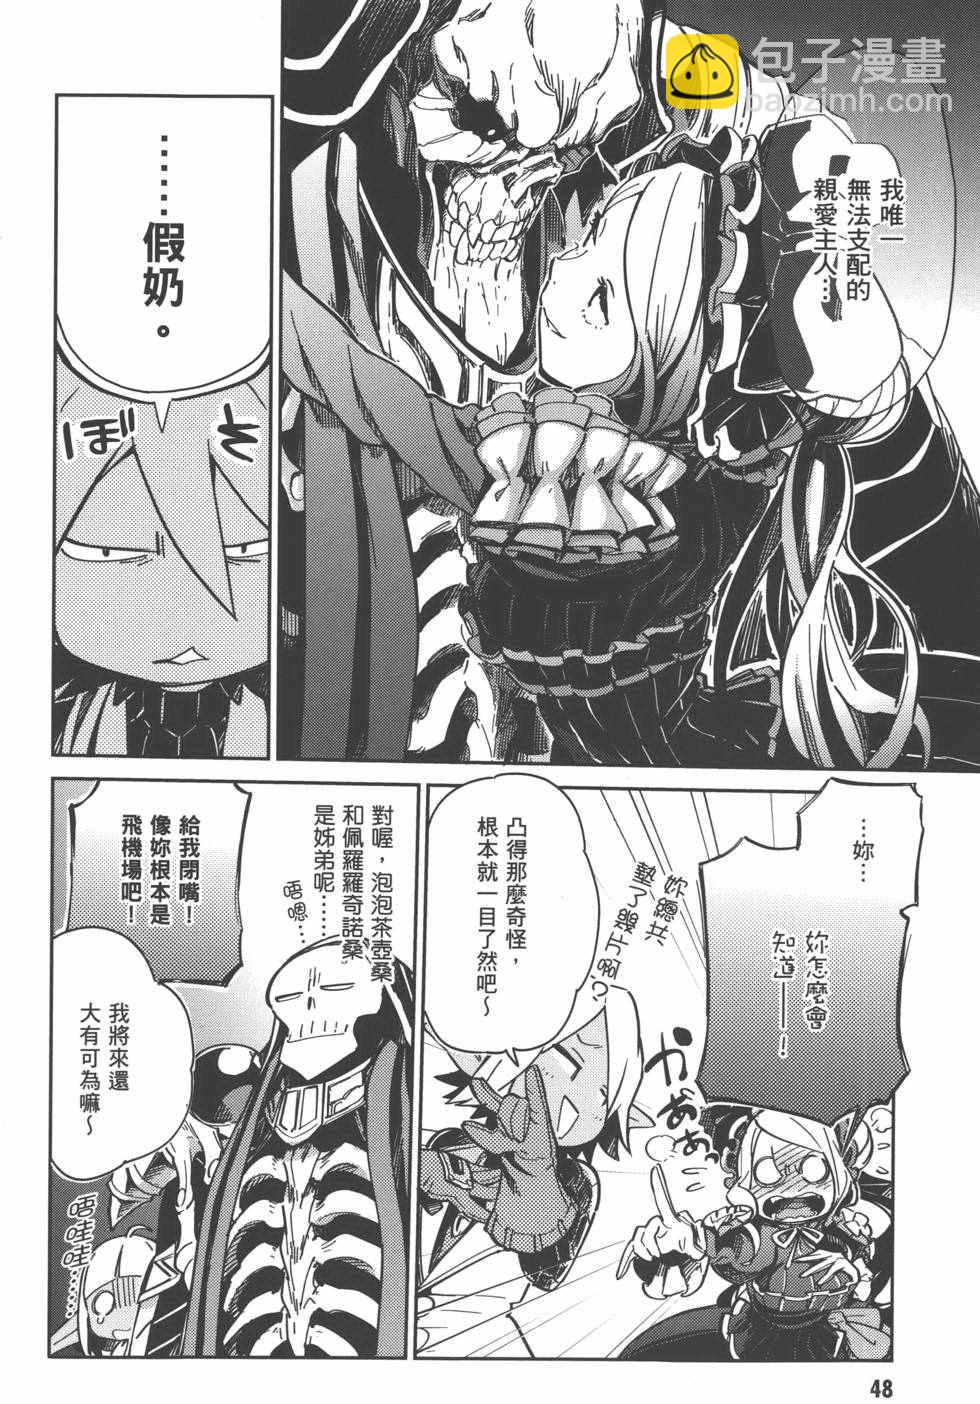 OVERLORD - 第1卷(1/4) - 2